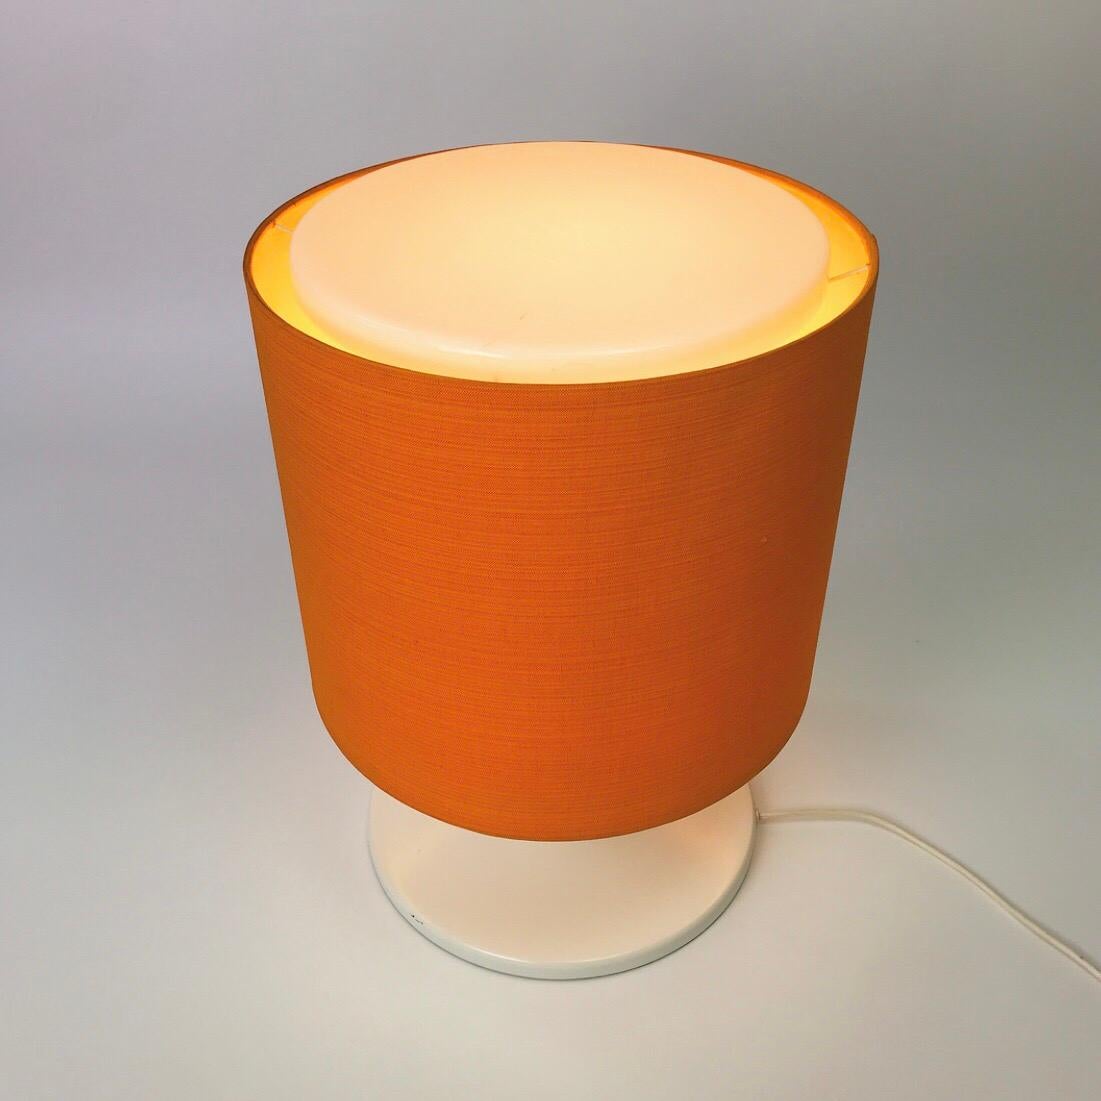 A real eyecatcher is this beautiful piece made in the 1970s by Staff Leuchten, Germany.

The tulip white lacquered base, the orange fabric and top to it all the milky white perspex top .... it’s just a stunning piece of design. 

Staff Leuchten